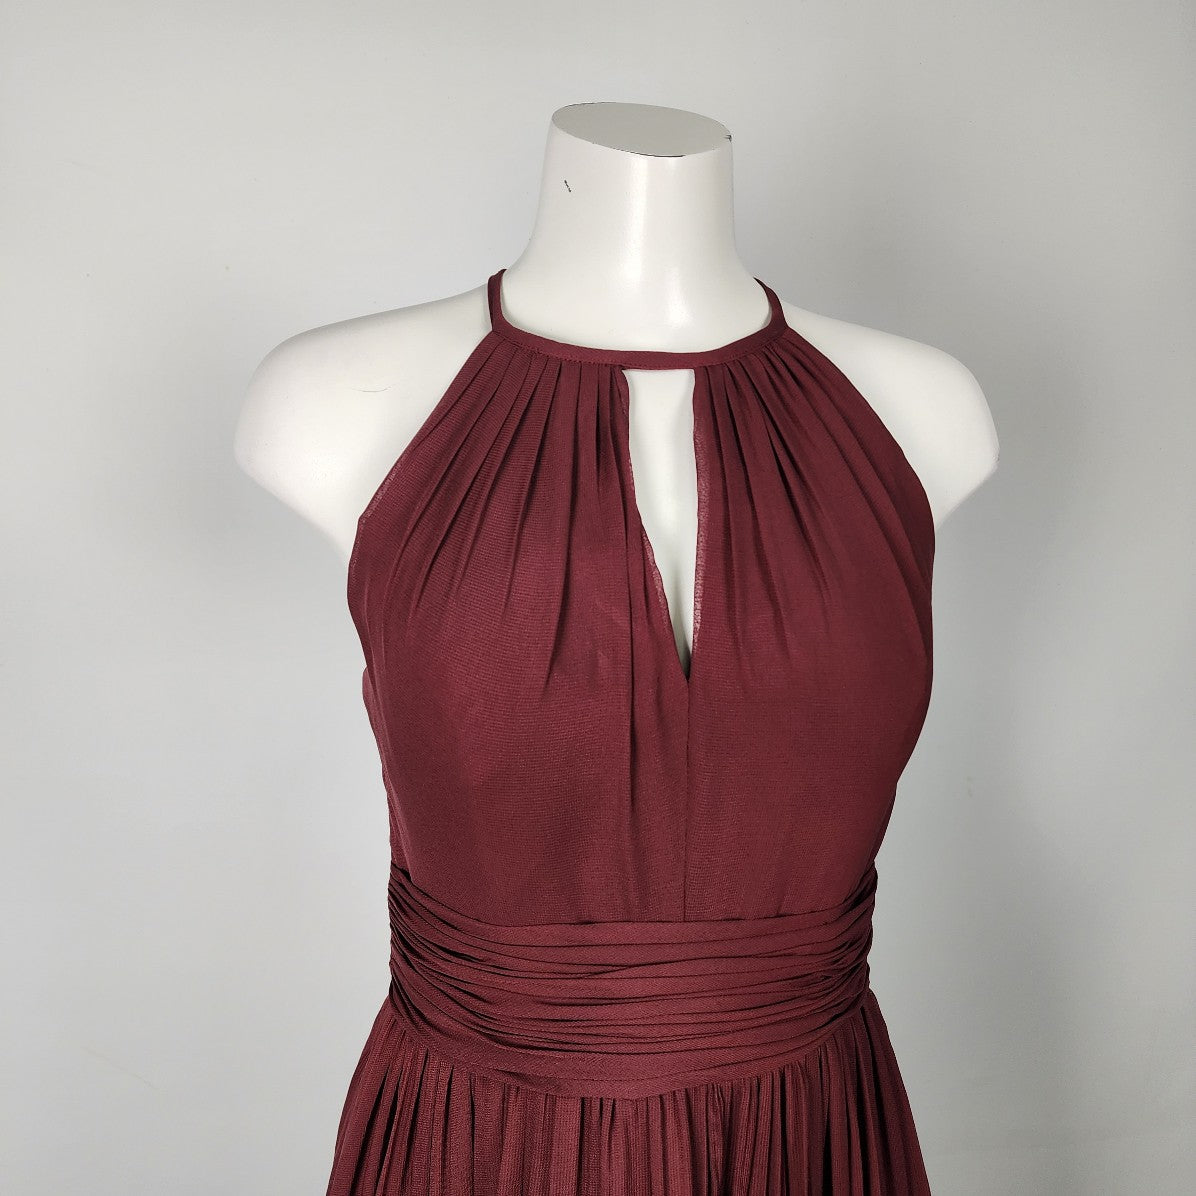 For Her and For Him Burgundy Halter Neck Bridesmaids Dress Size S